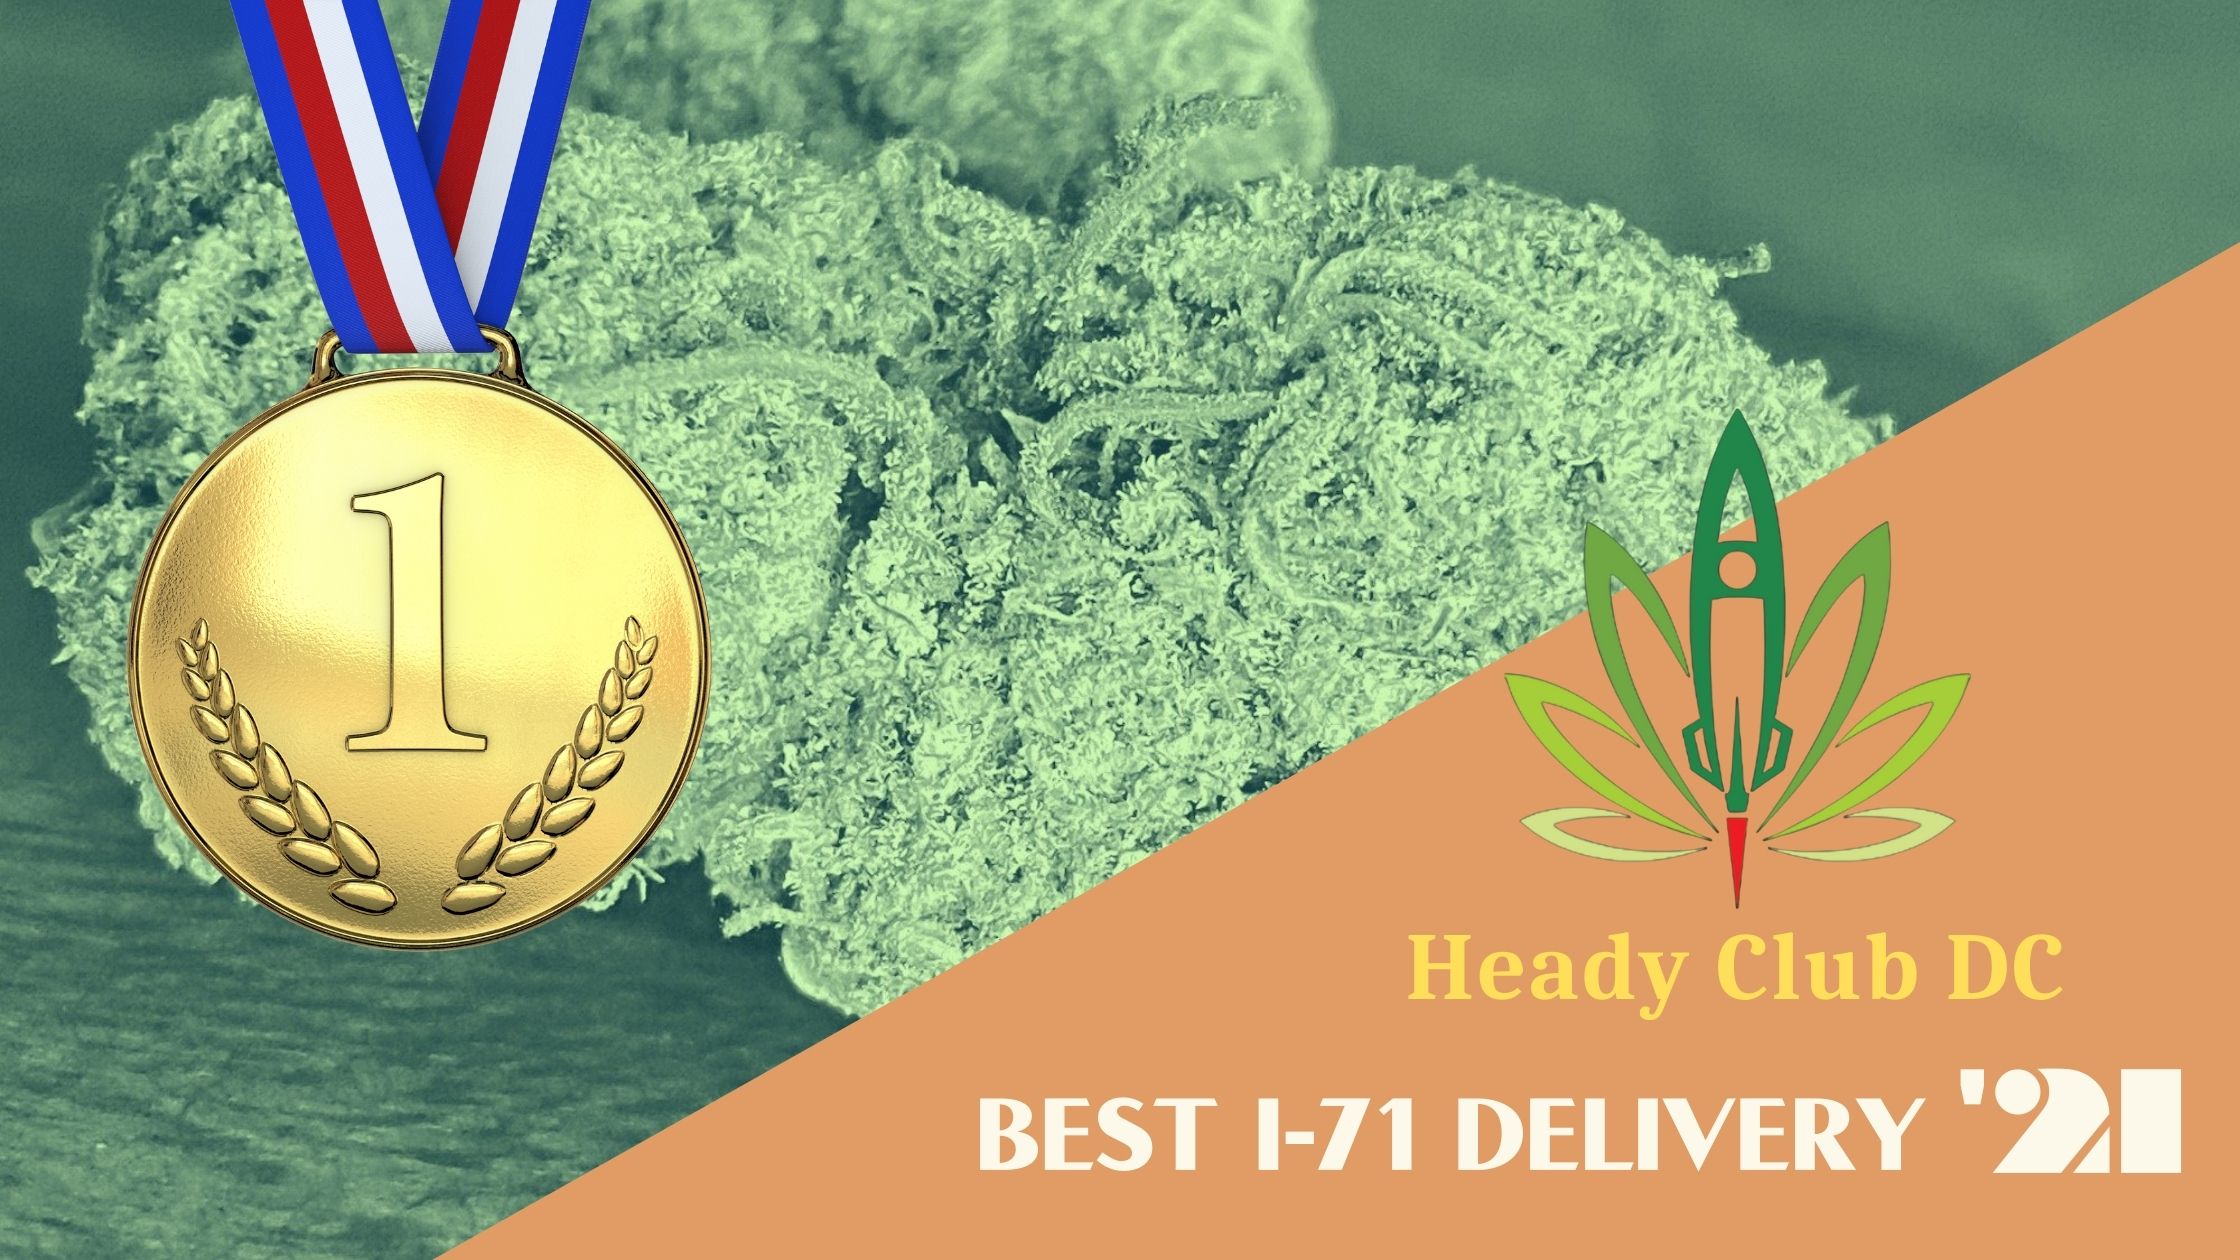 Best delivery 2021 heady club dc